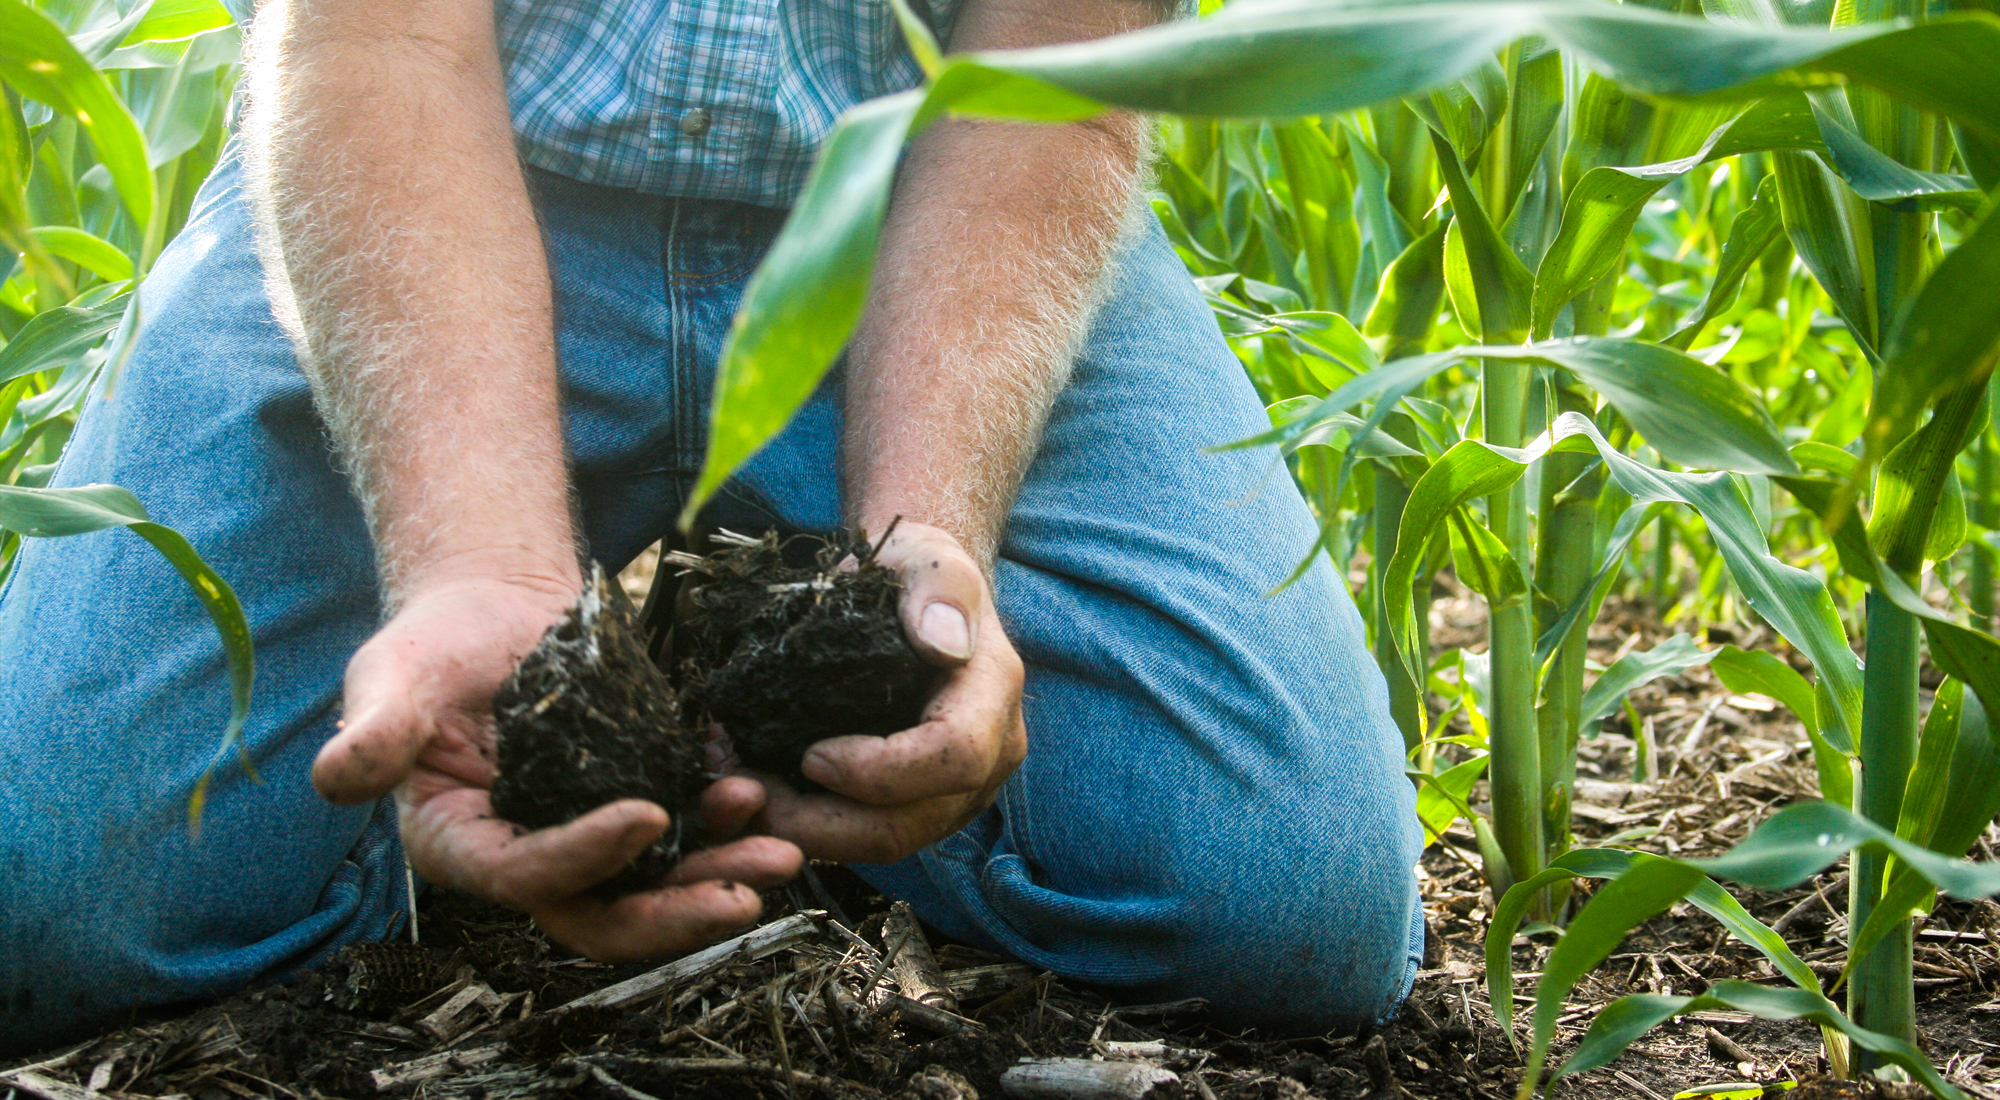 Man in blue shirt and blue jeans kneels in corn field. 